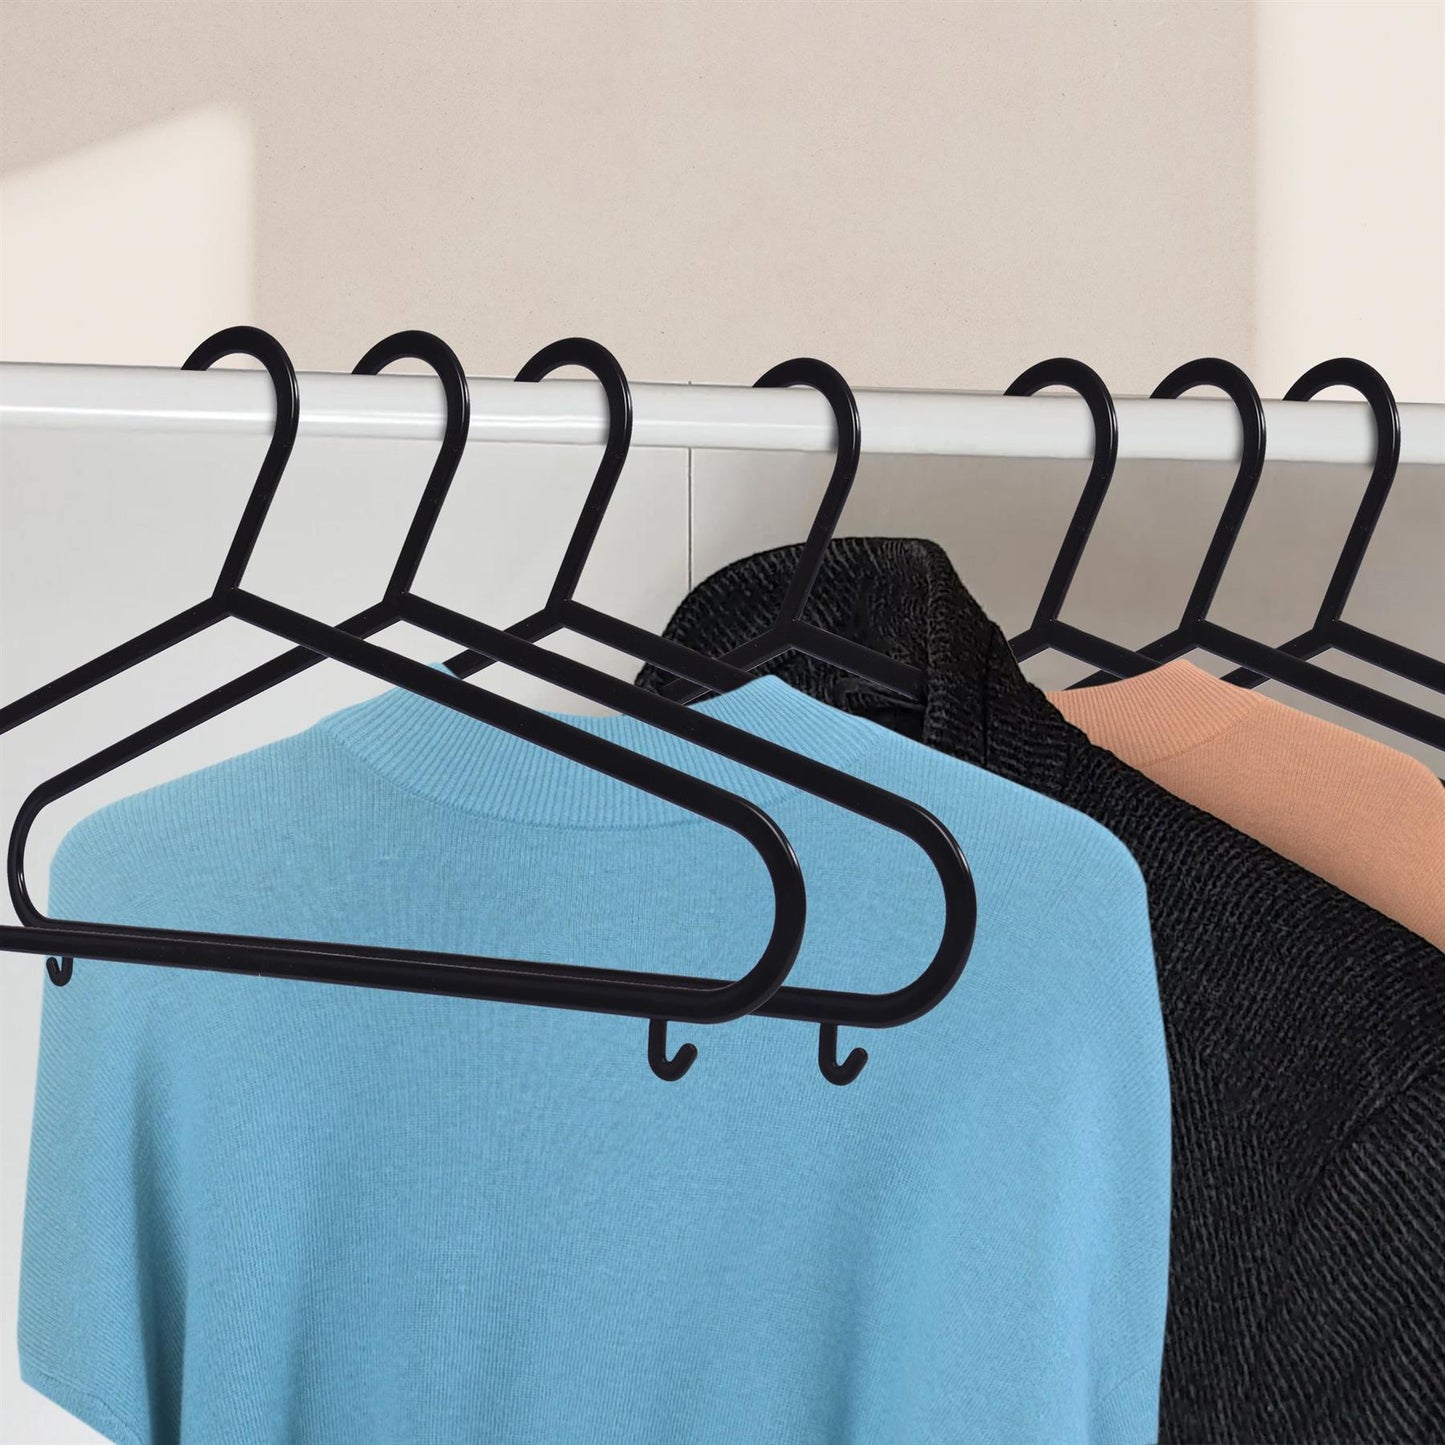 Slim And Lightweight Plastic Hangers For Adults' Clothes And Wardrobe Organization